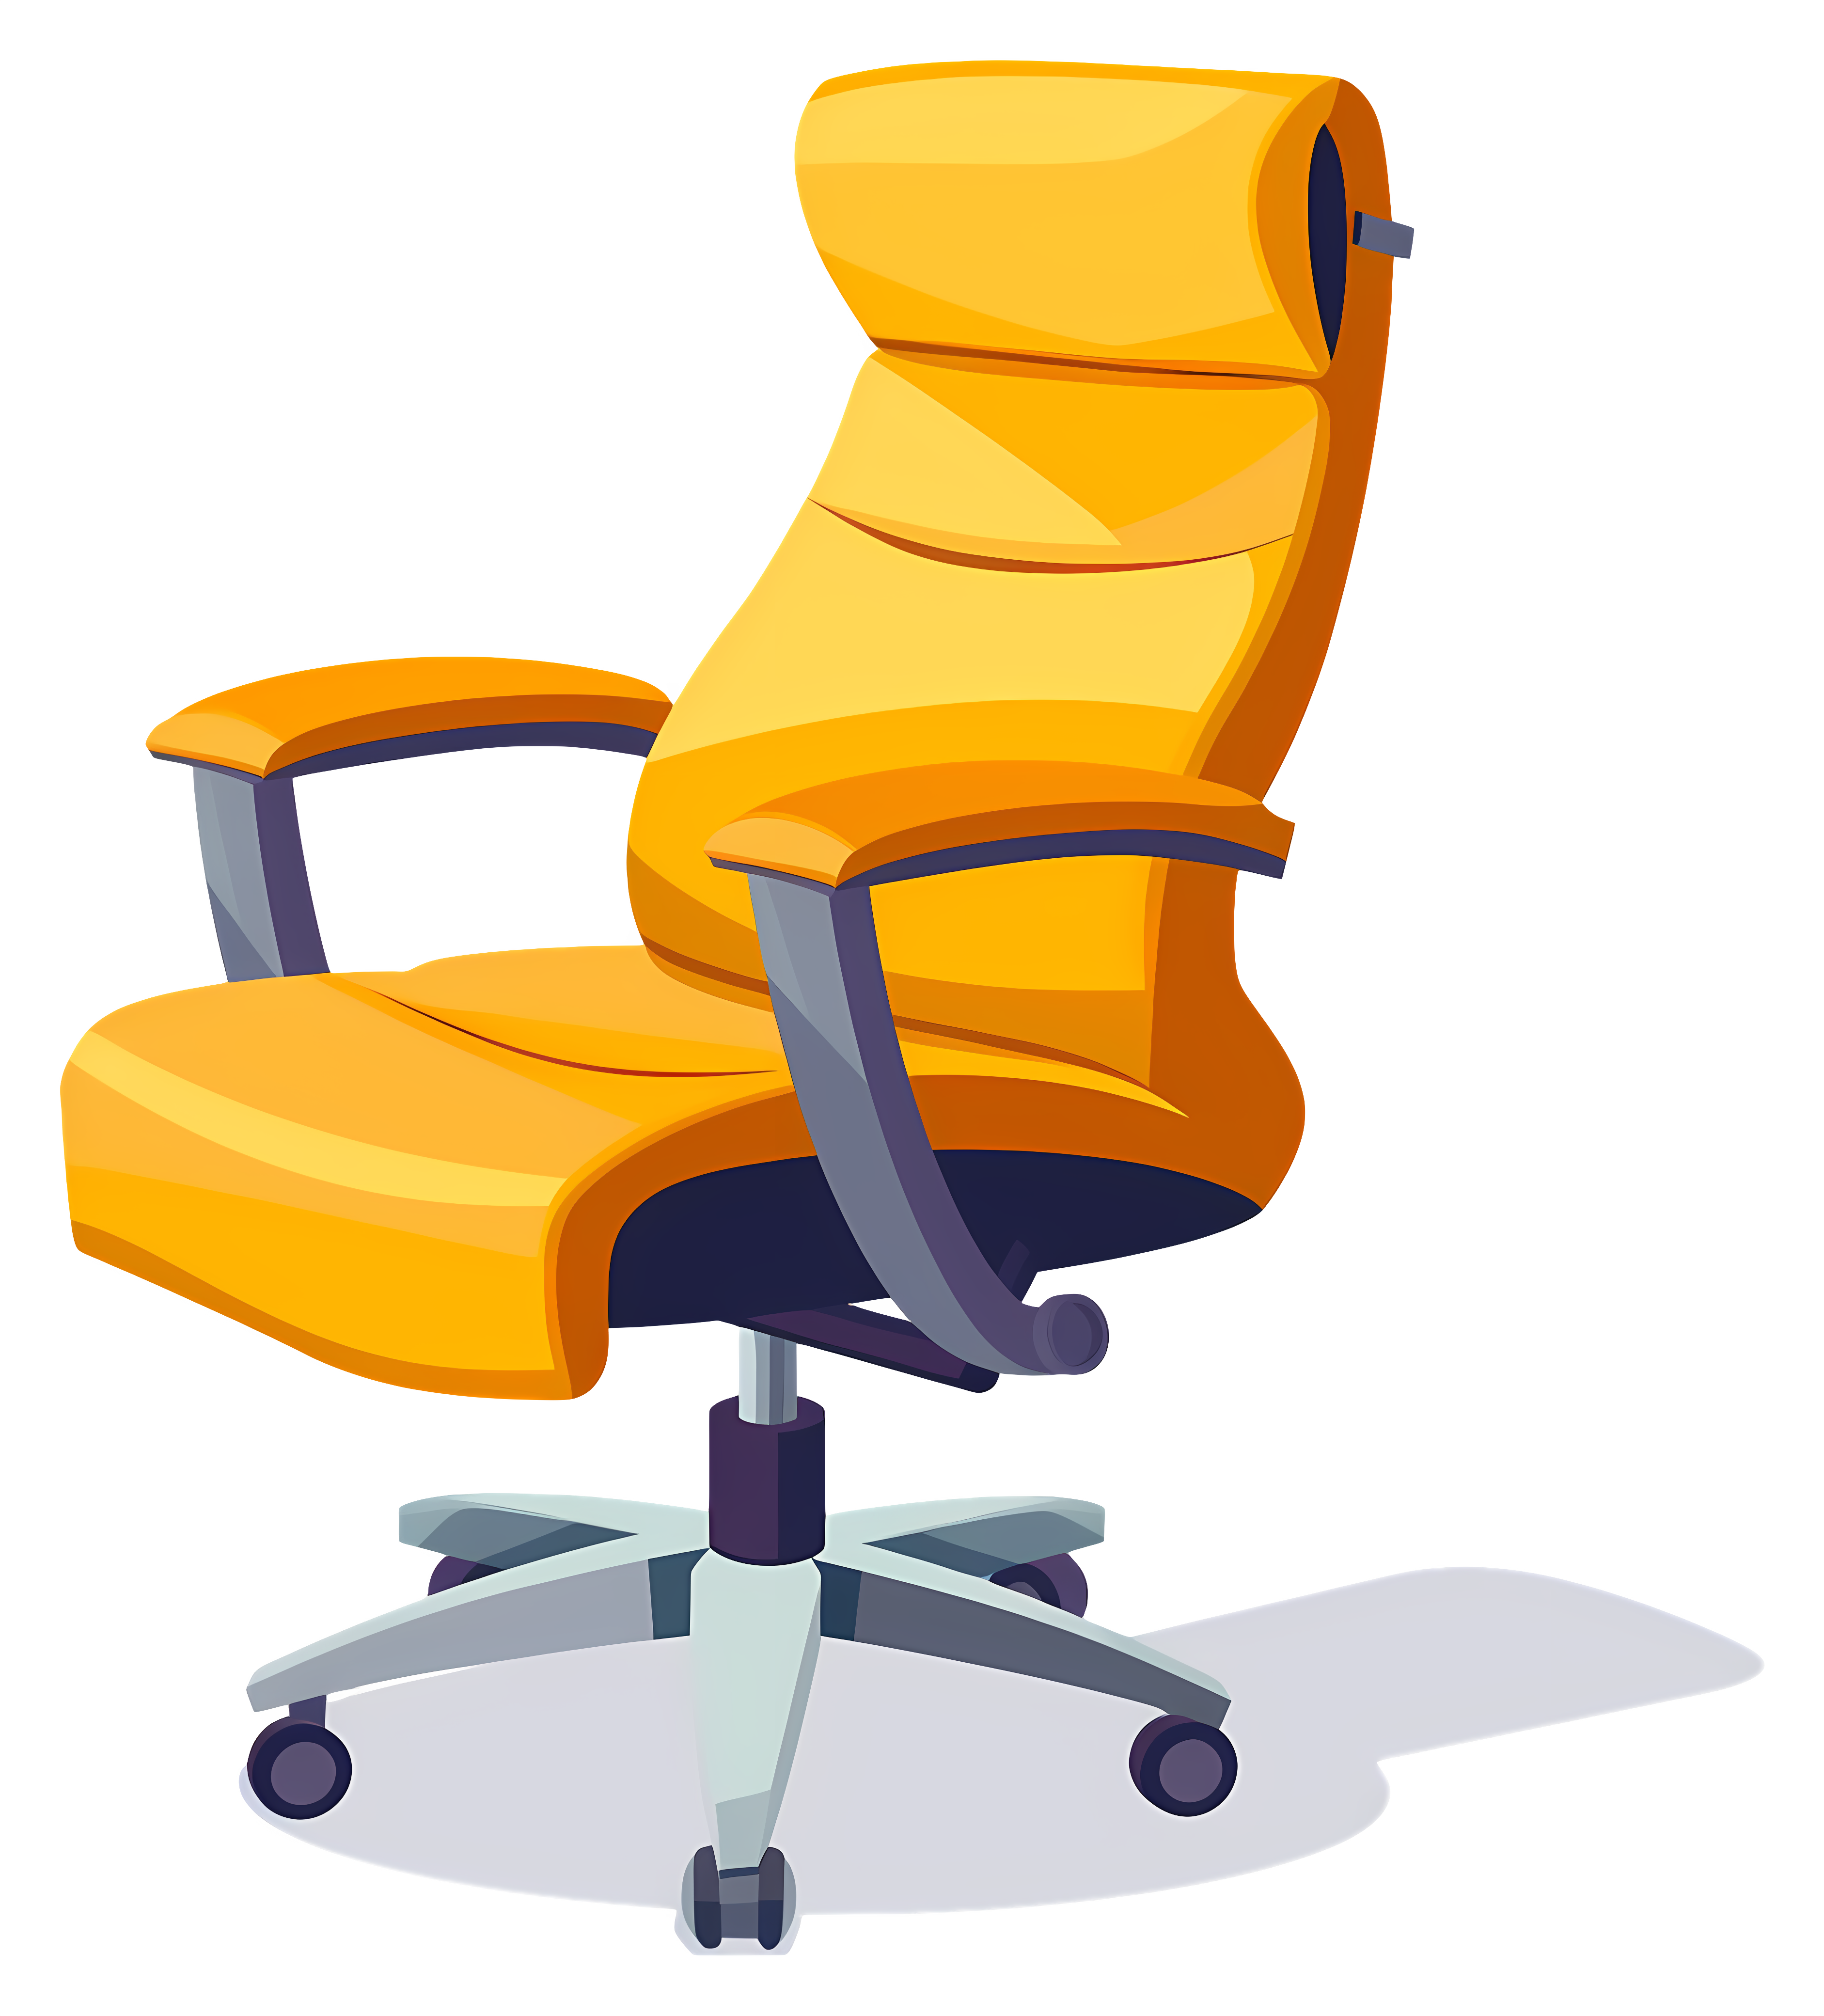 Yellow office chair with upholstery, no controls Clipart